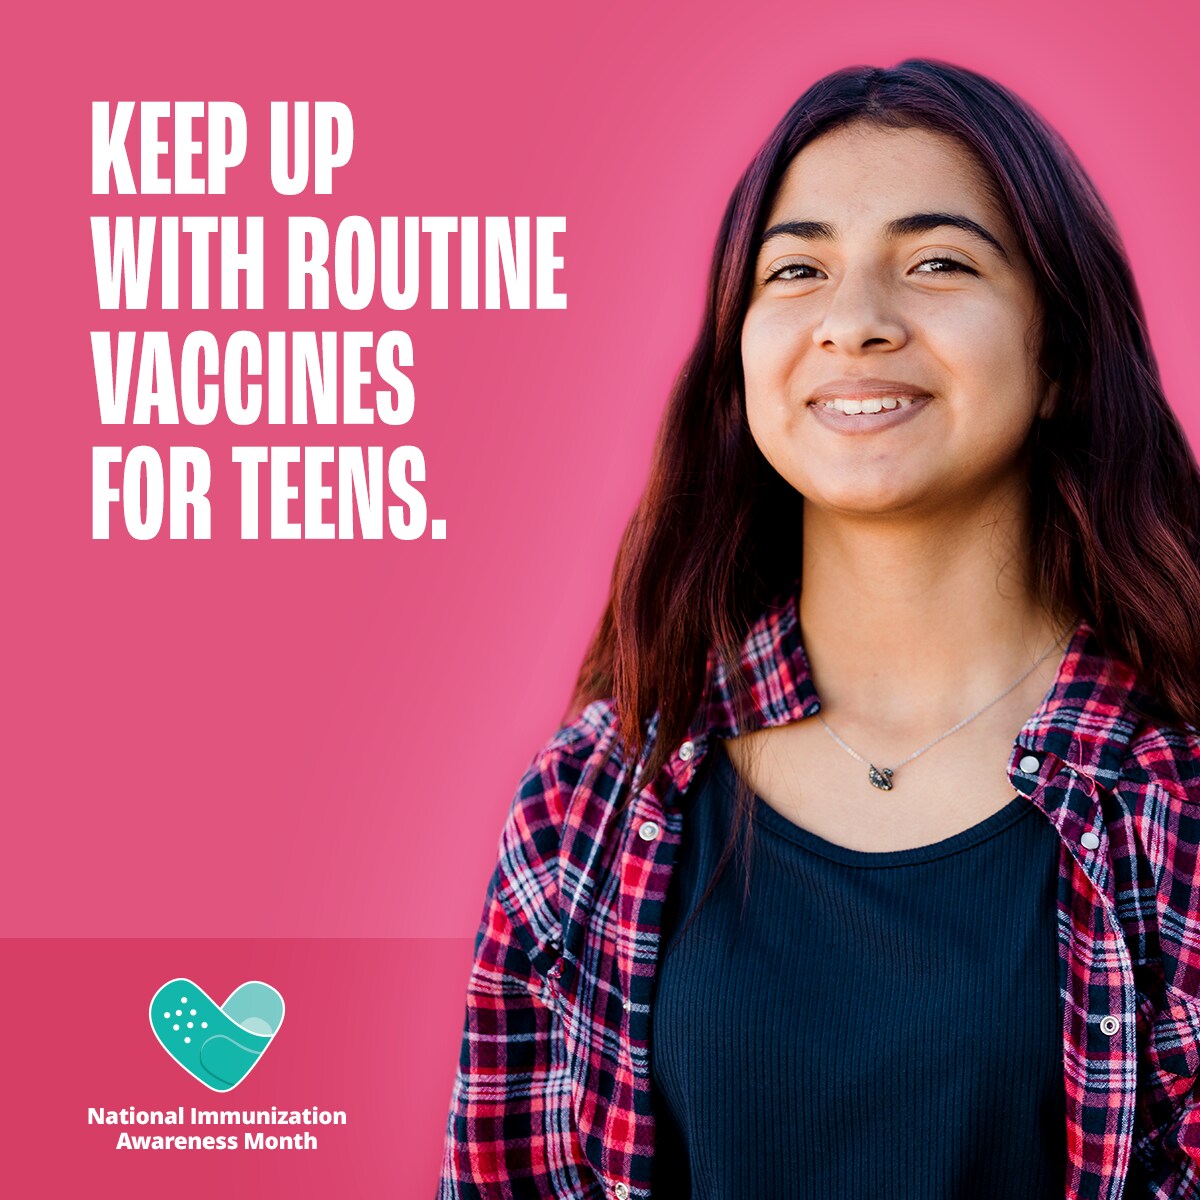 Keep up with routine vaccines for teens. National Immunization Awareness Month